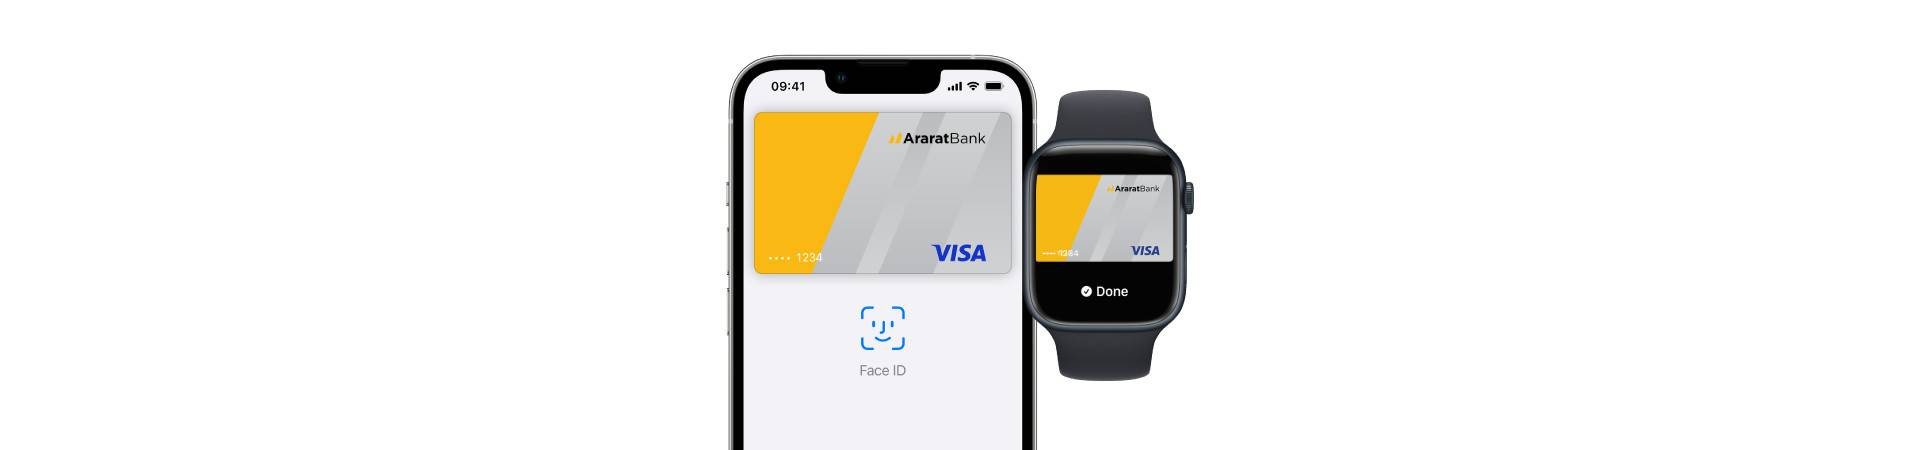 Apple Pay payments